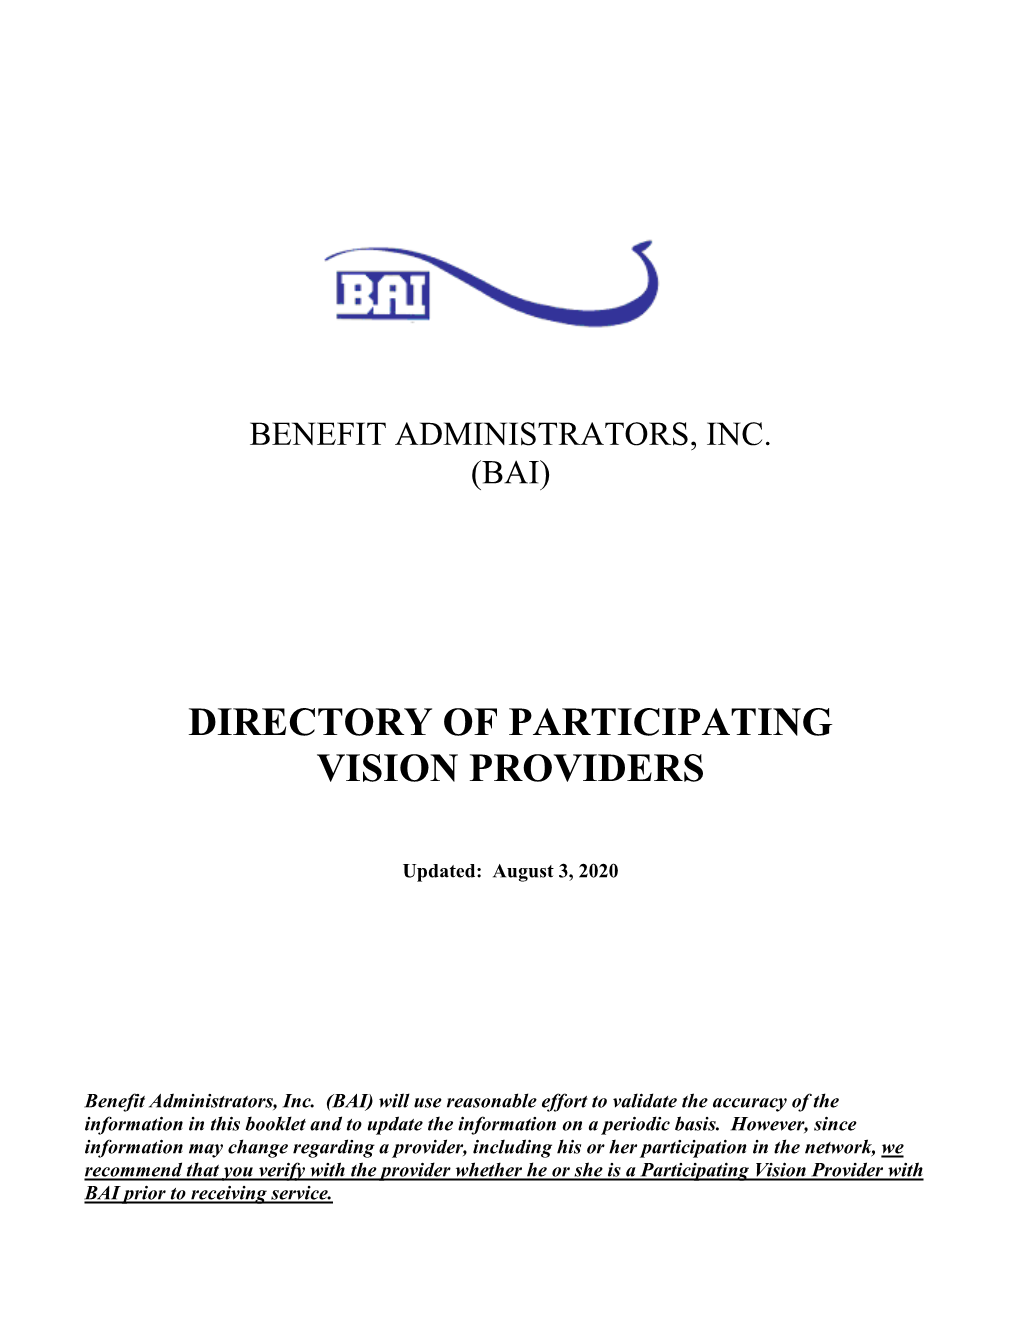 Directory of Participating Vision Providers